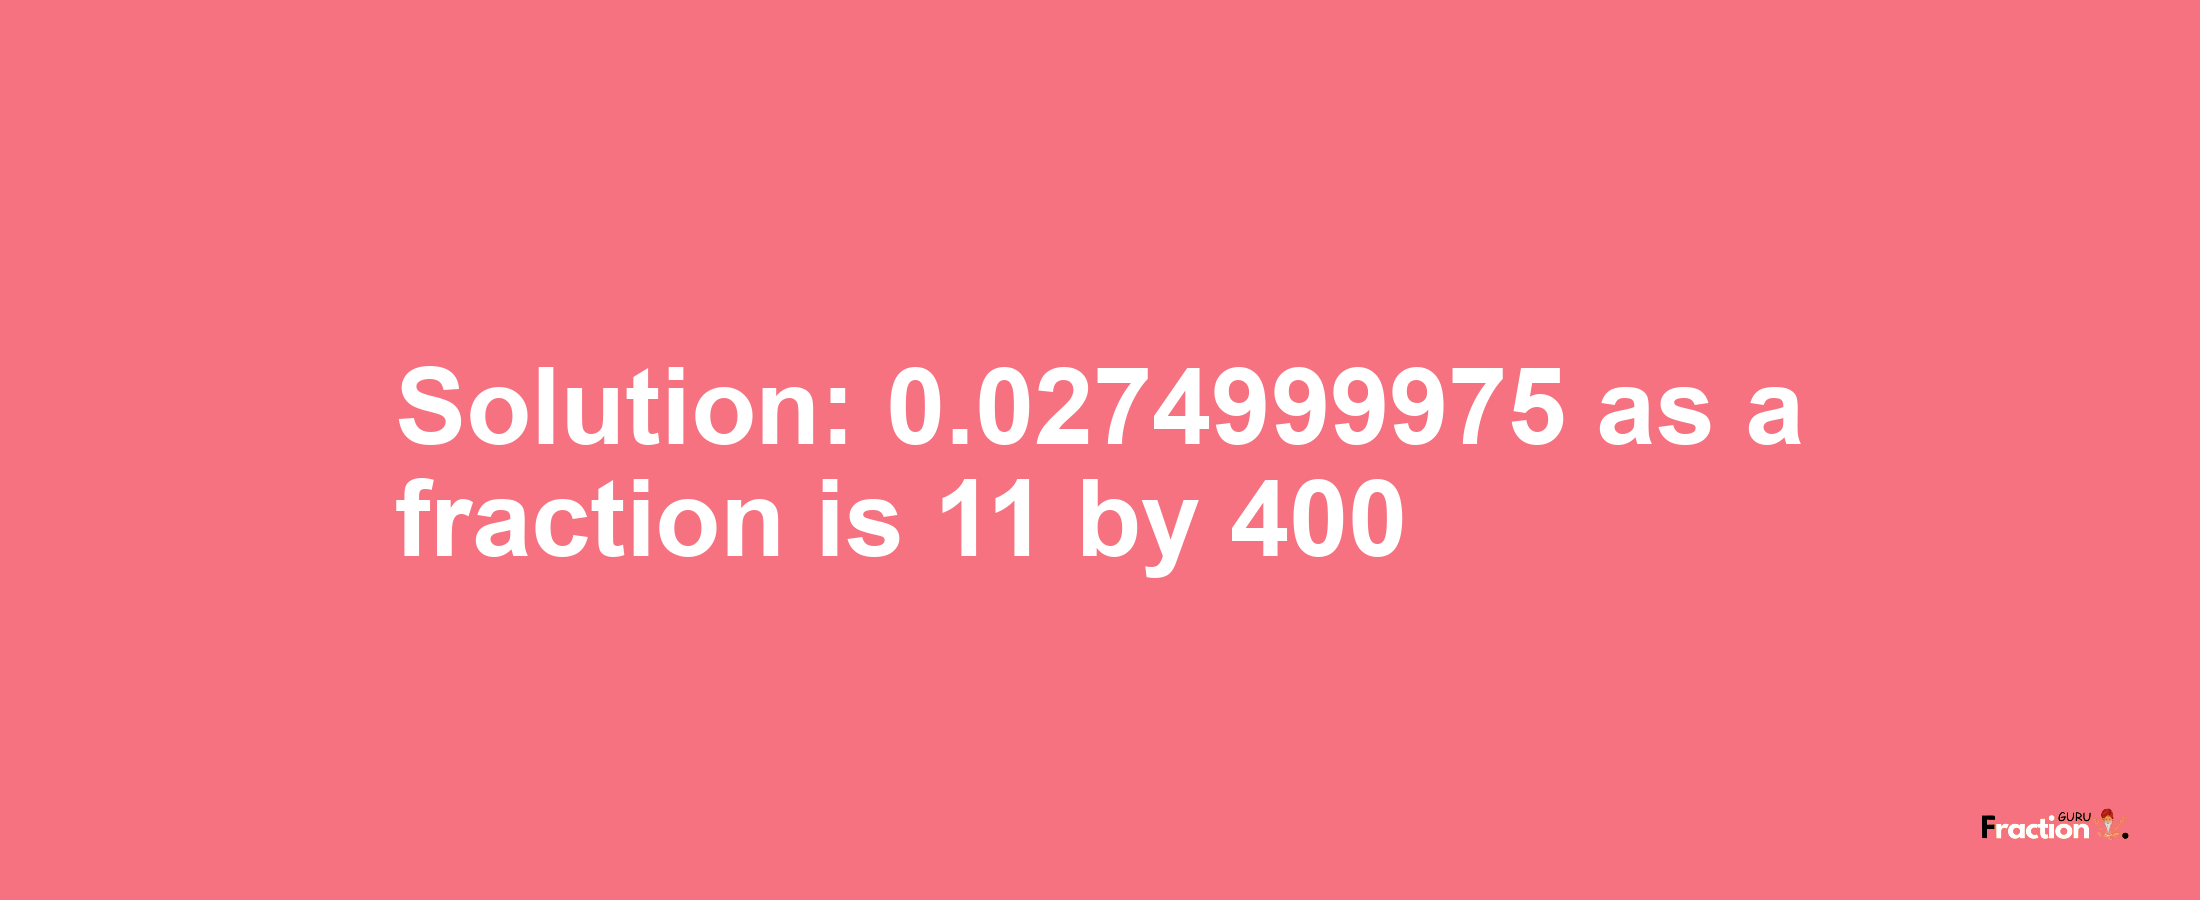 Solution:0.0274999975 as a fraction is 11/400